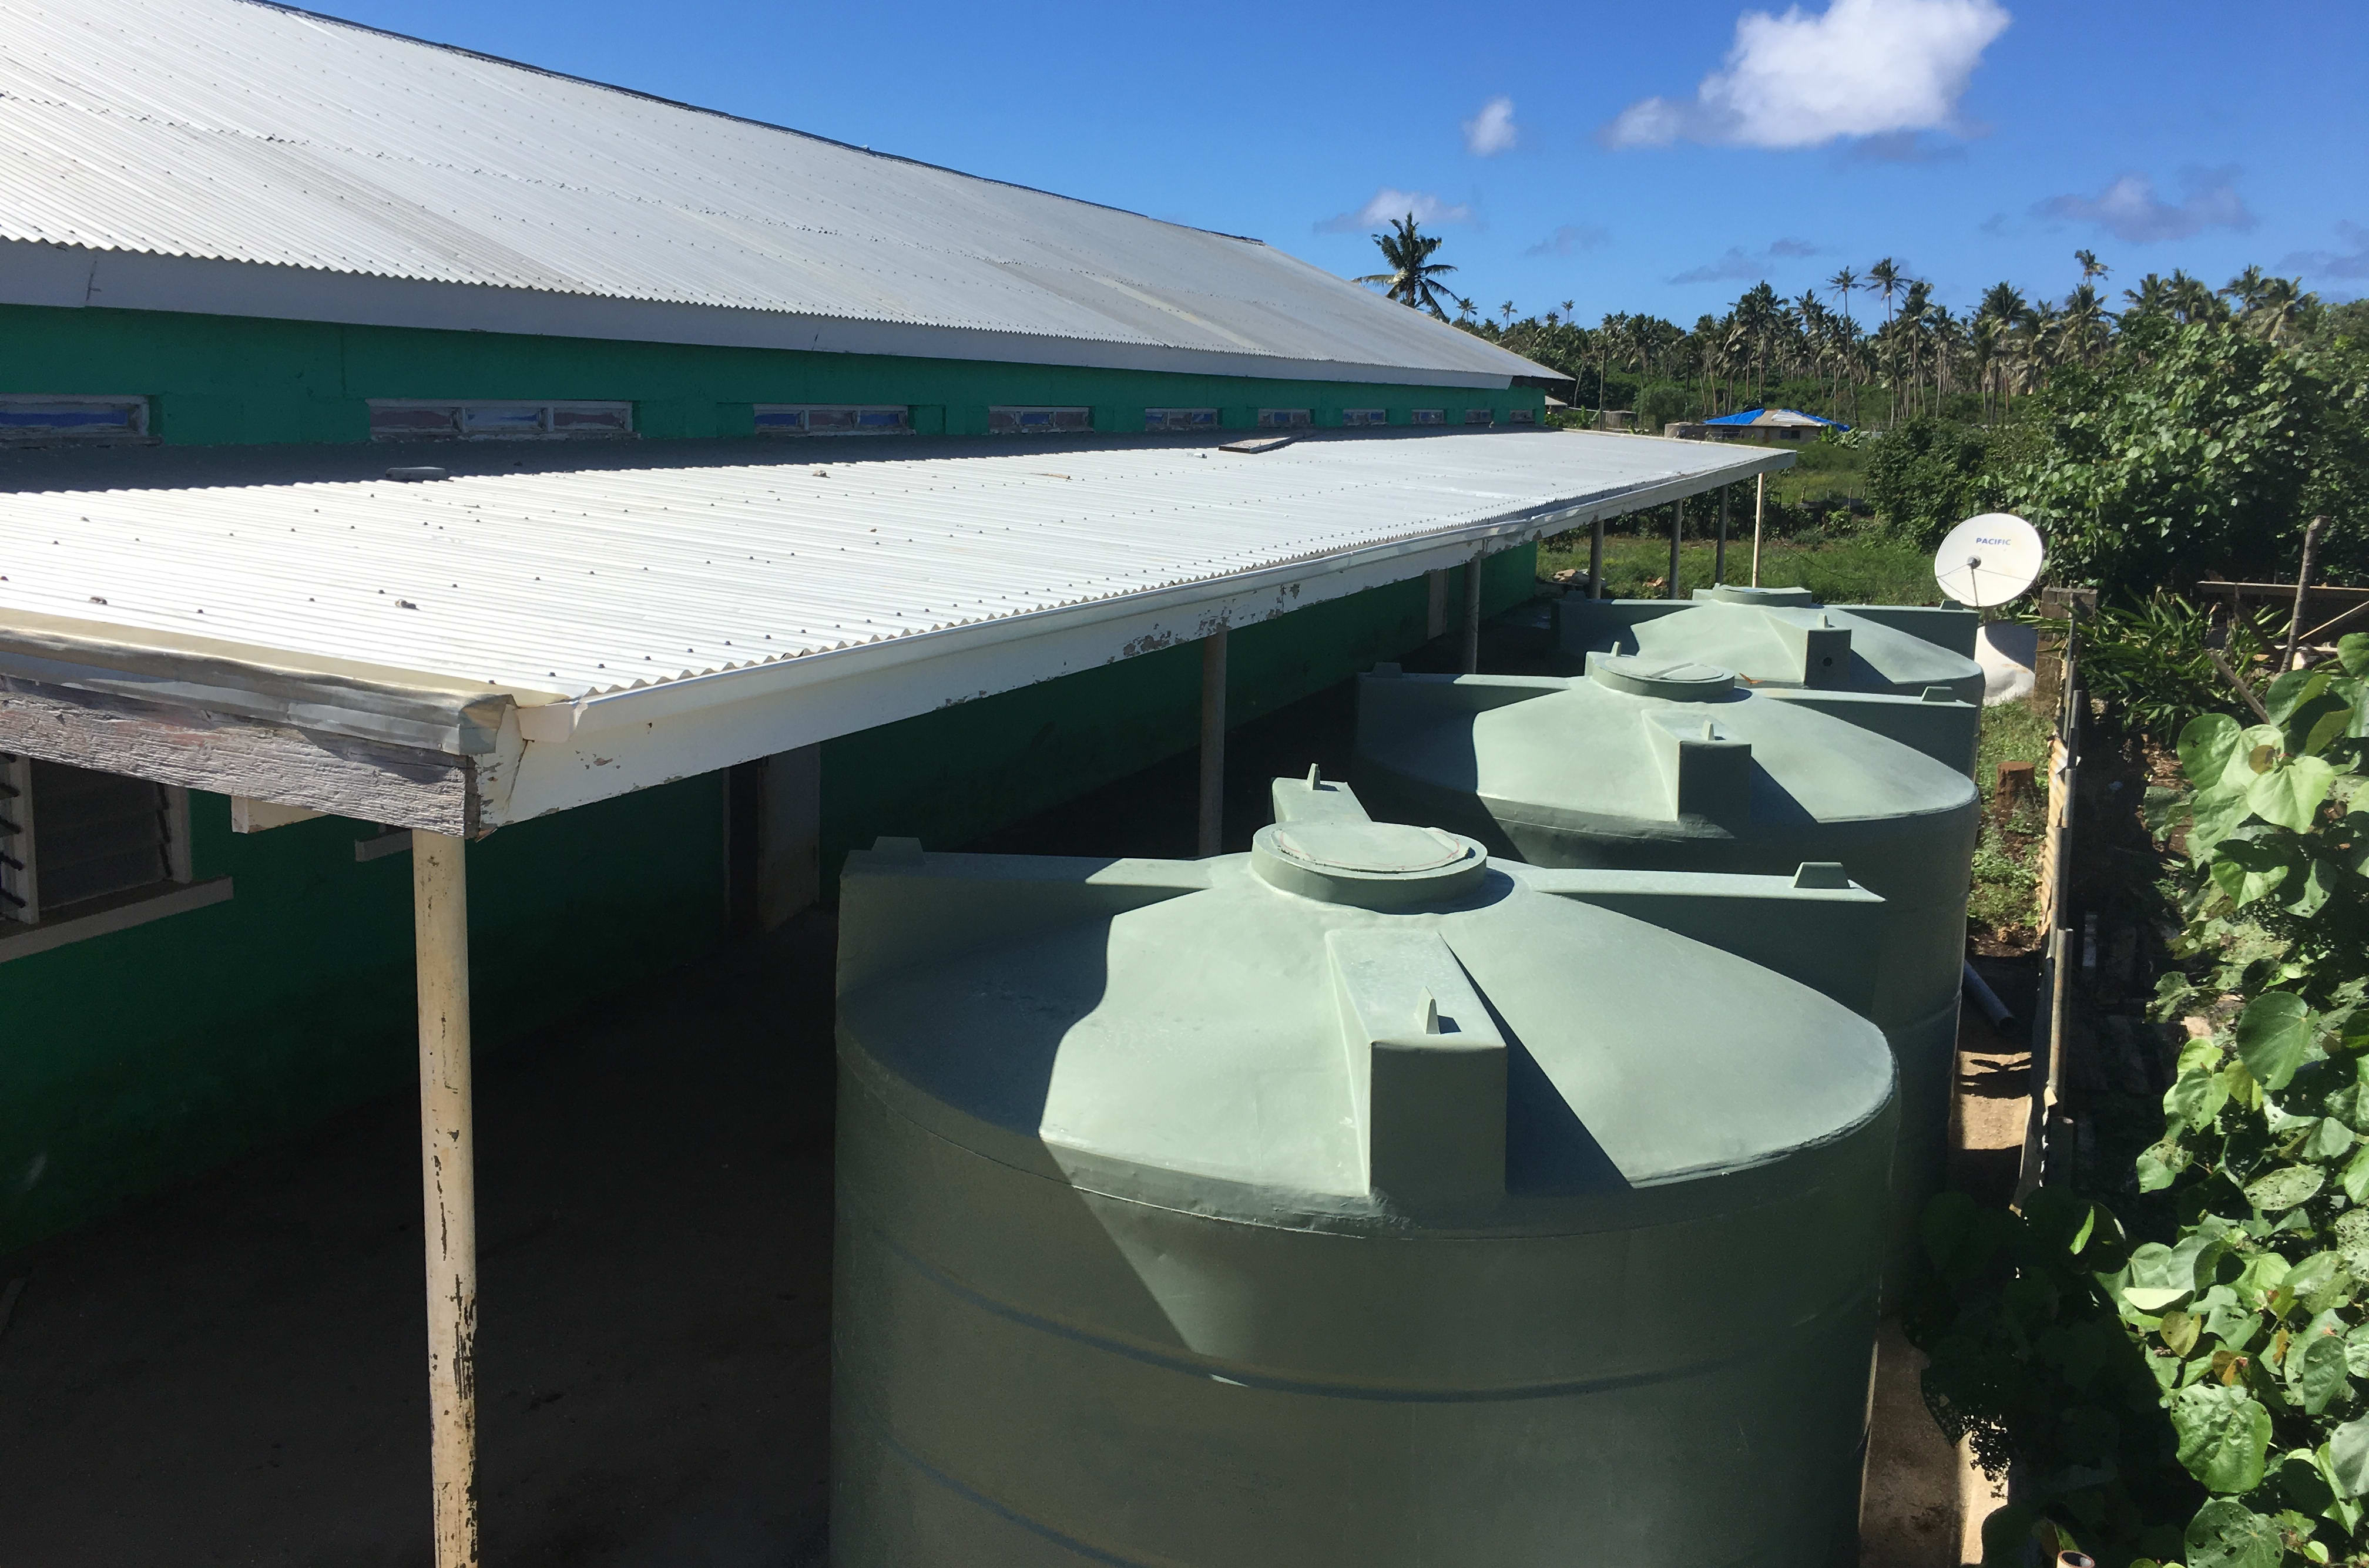 Water tanks installed as part of the New Zealand led exercise Tropic Twilight at the Faleloa Community Hall in Tonga.